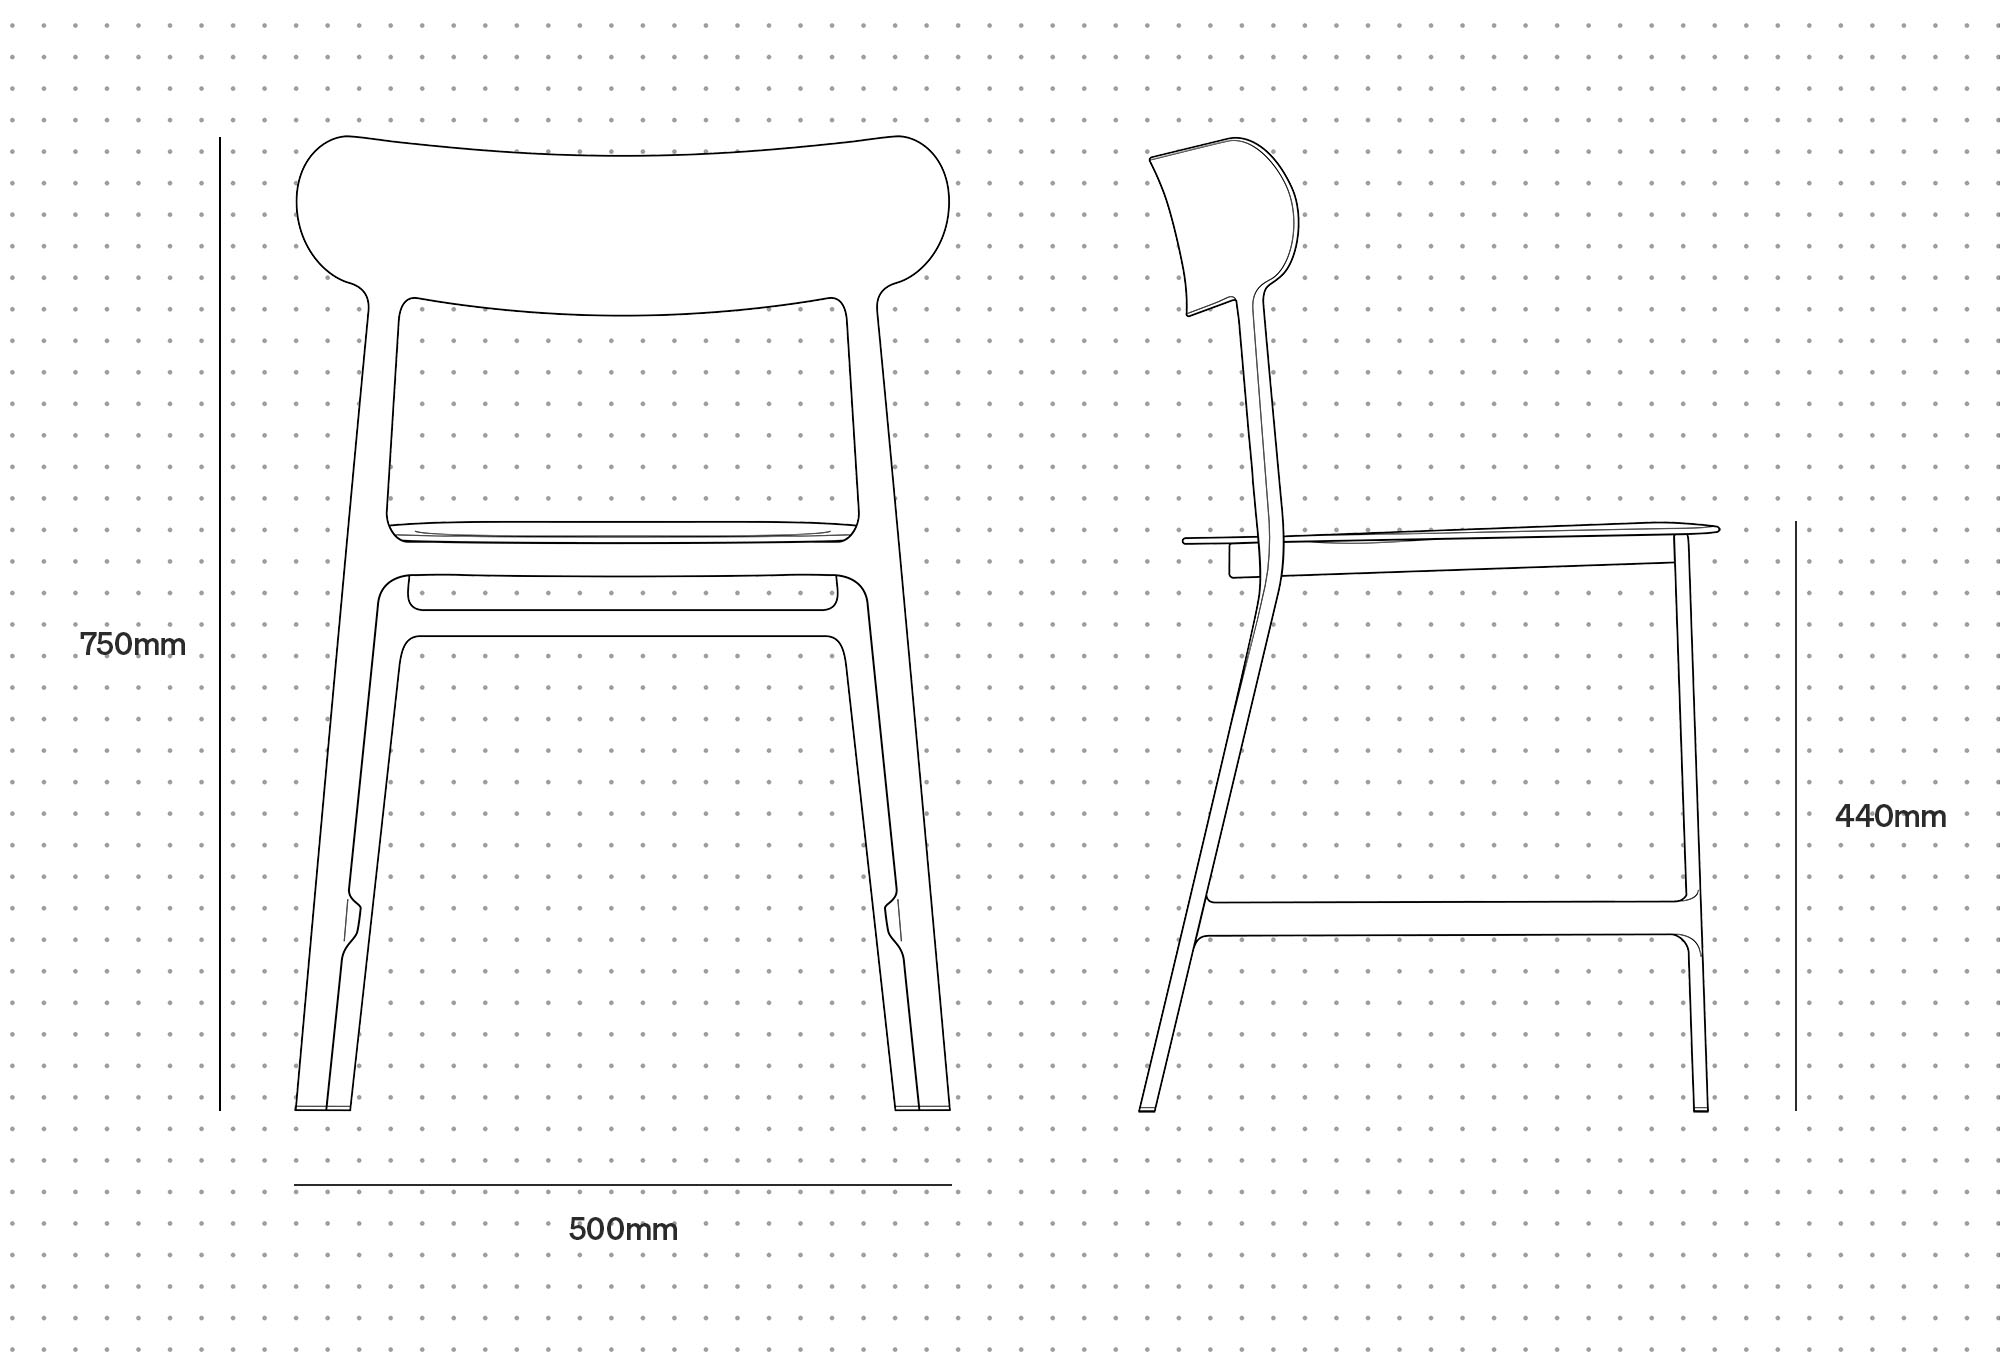 Chair information